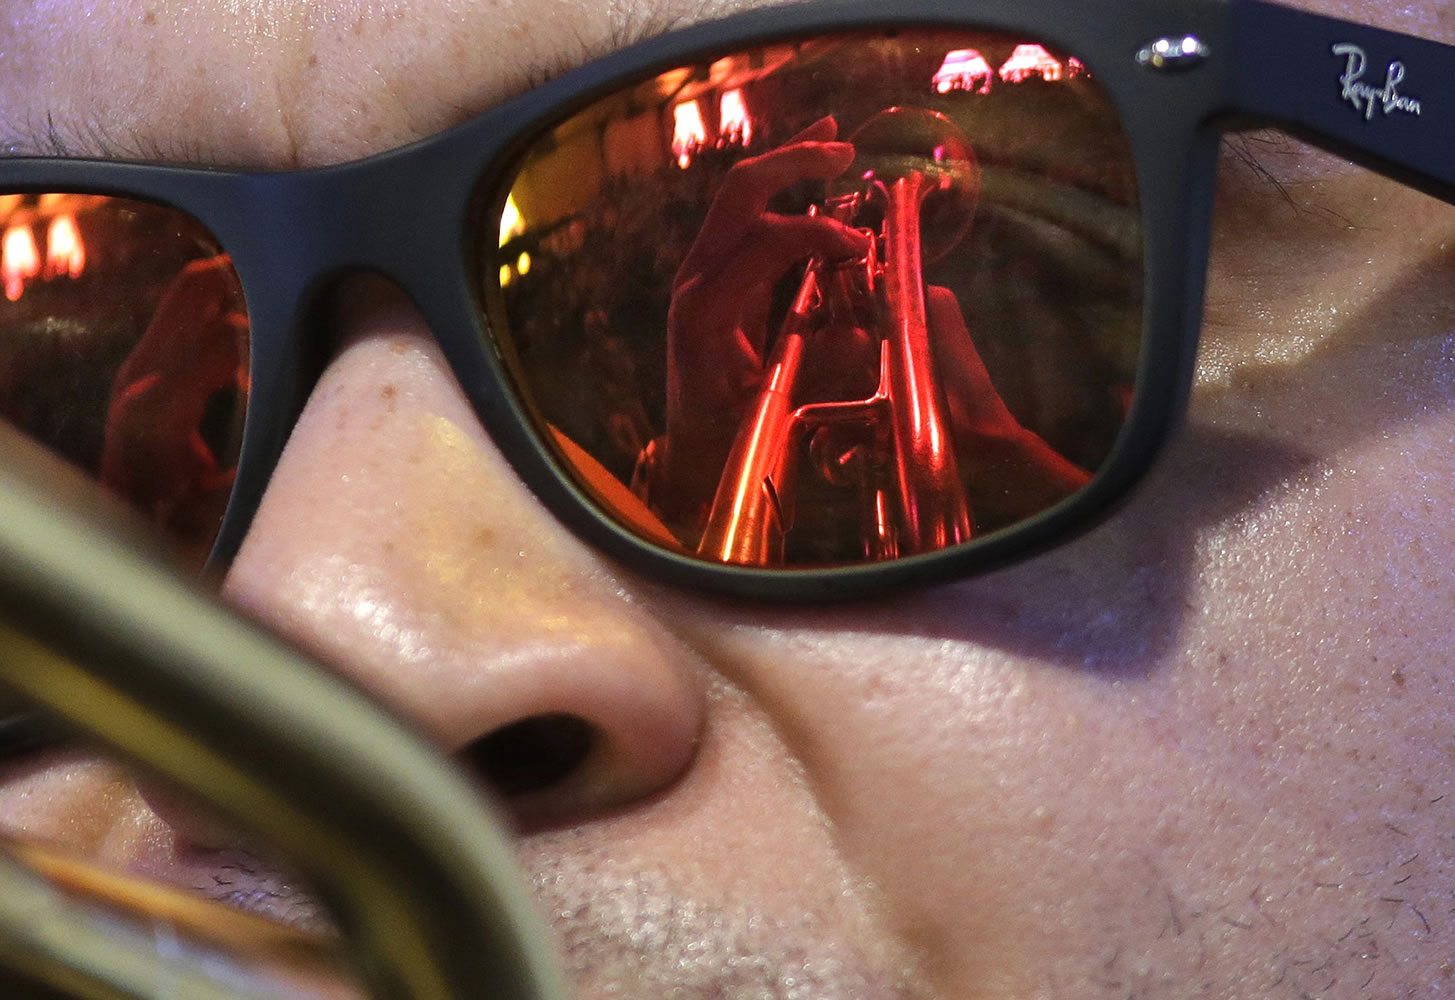 The hands and trumpet of jazz recording artist Irvin Mayfield are reflected in his glasses as he performs Thursday at the New Orleans Jazz and Heritage Festival.